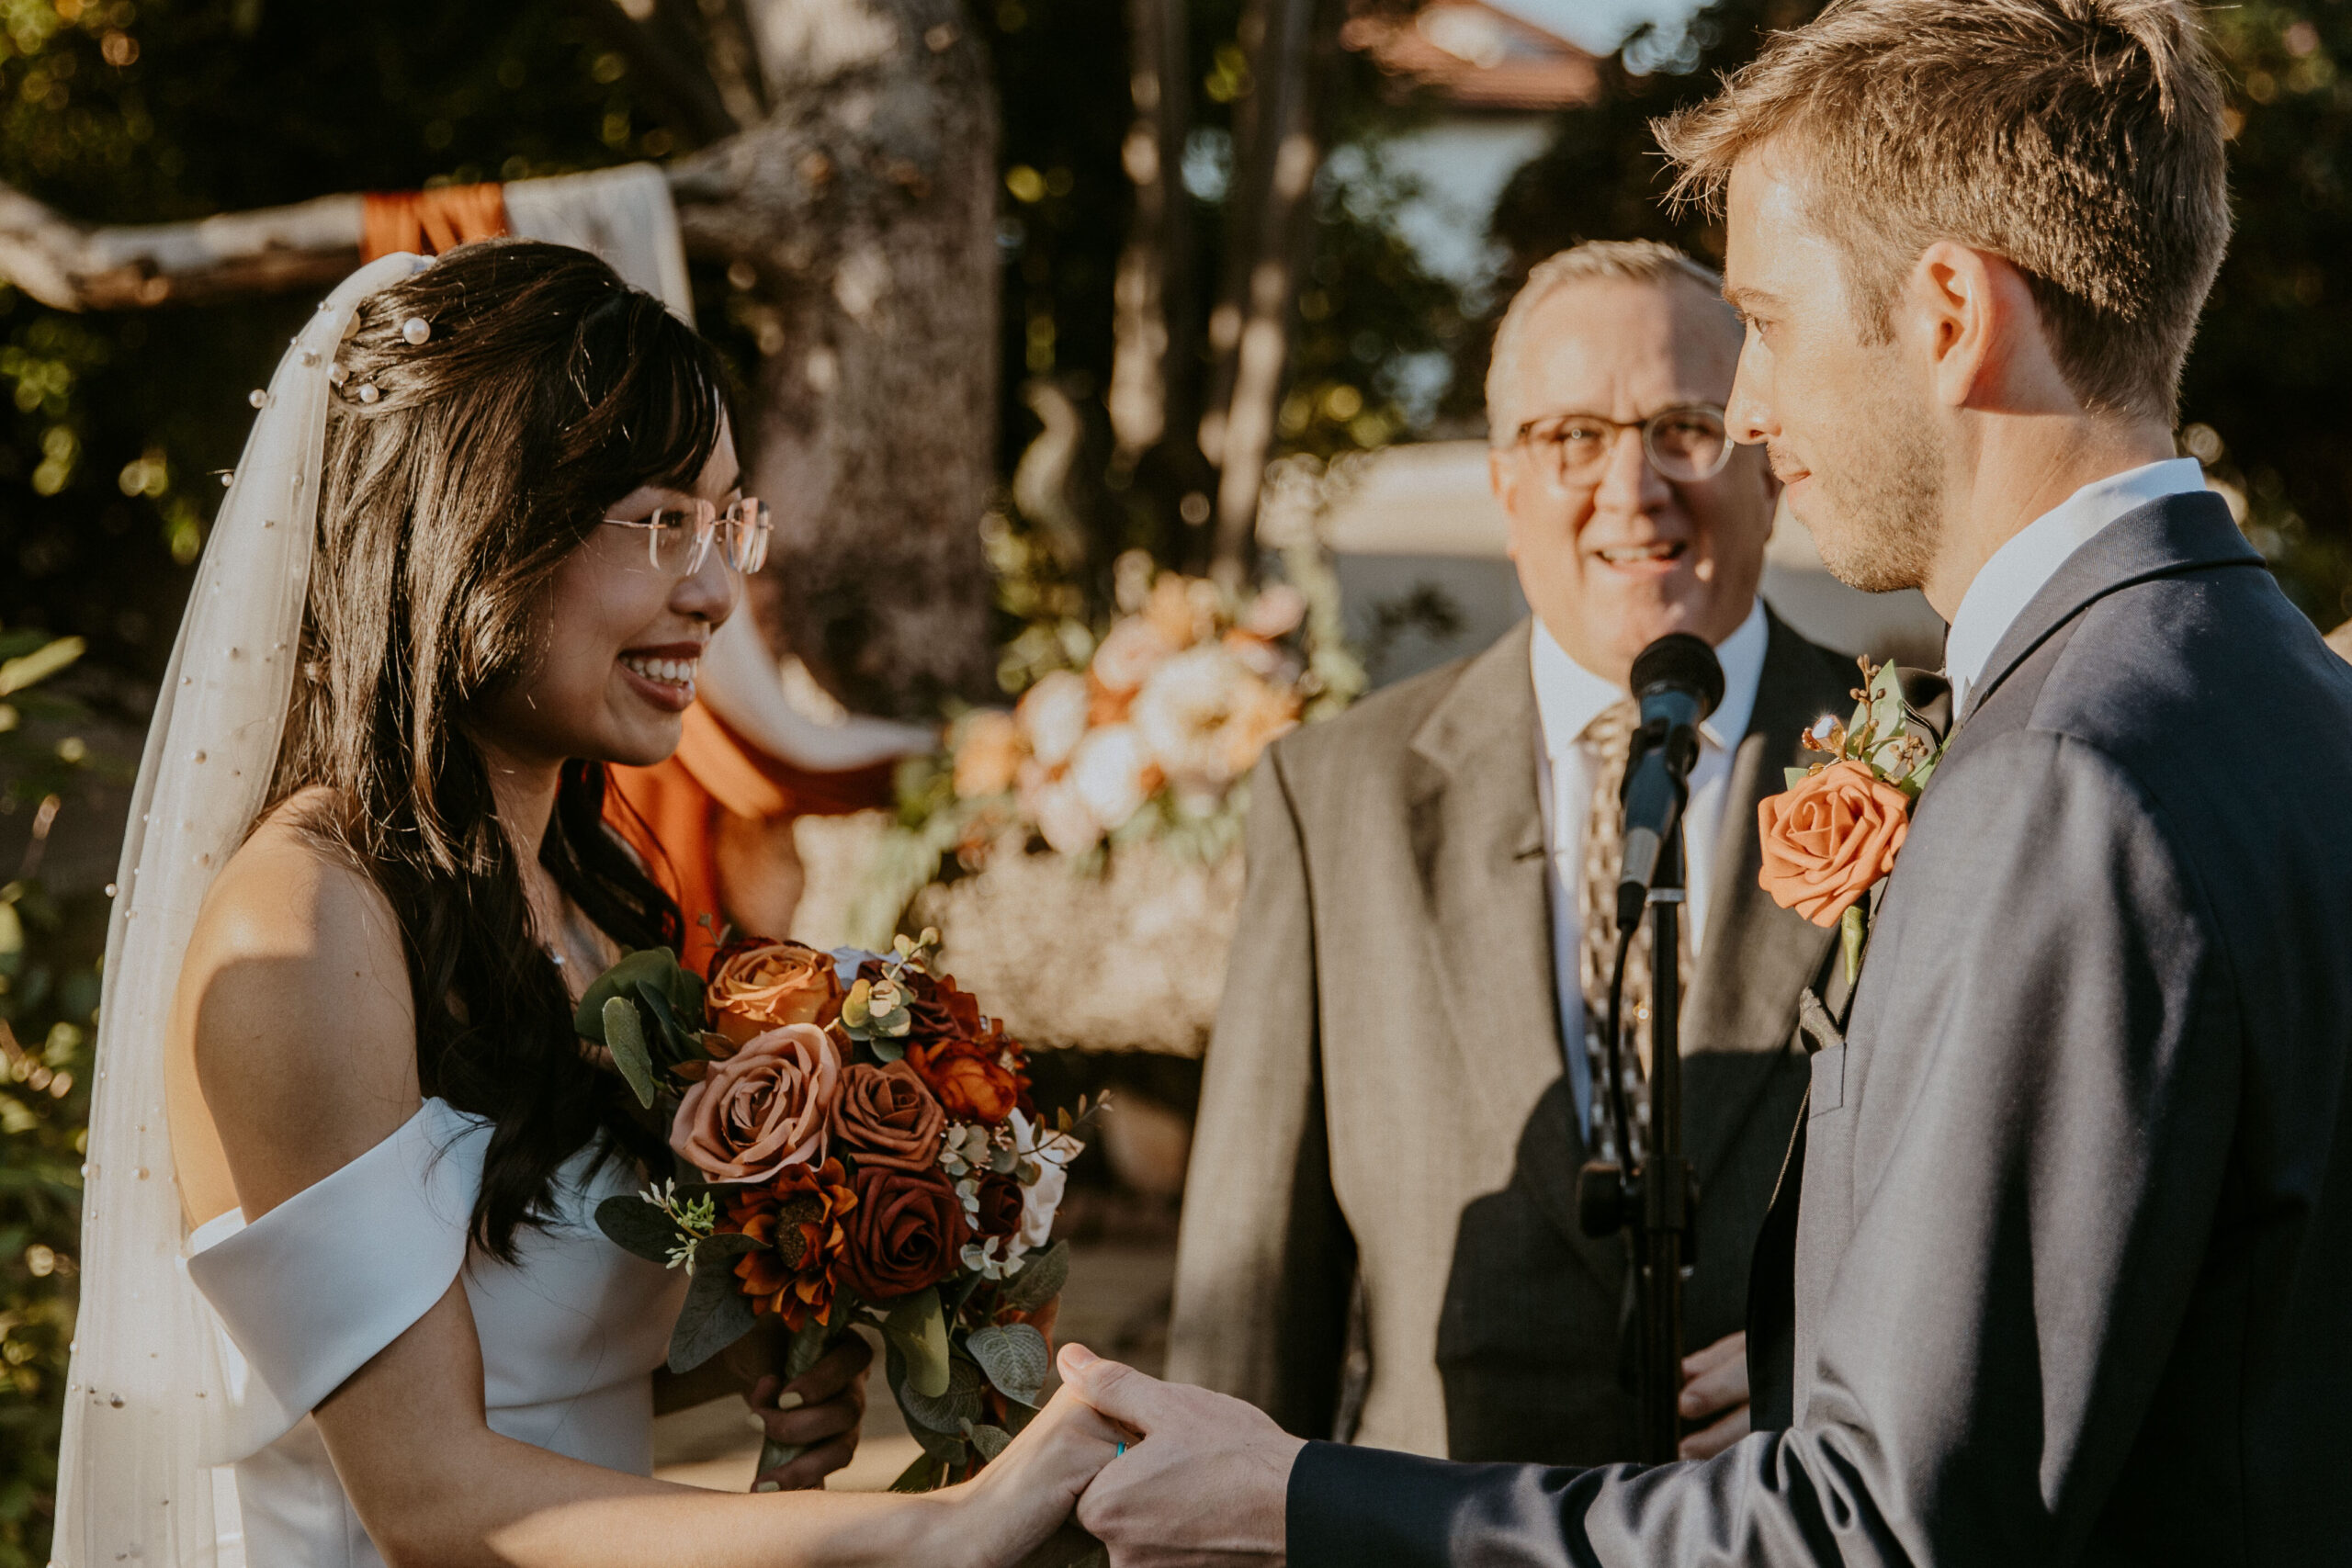 A bride and groom exchange vows at an outdoor wedding ceremony, with an officiant standing in the background at their intimate backyard wedding.